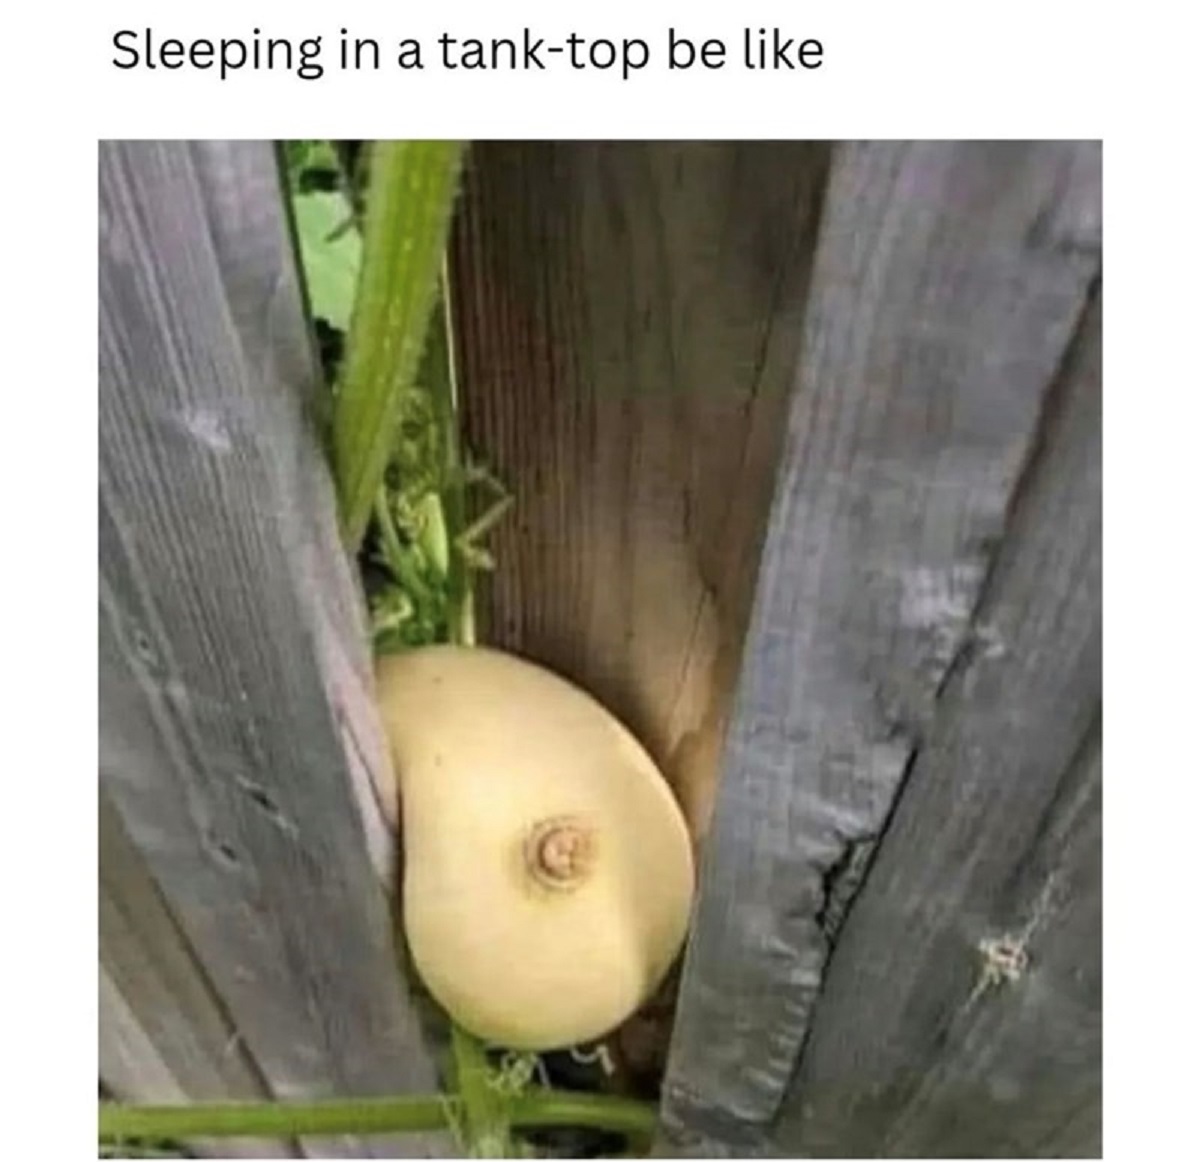 spicy memes -  she falls asleep in a tank top - Sleeping in a tanktop be